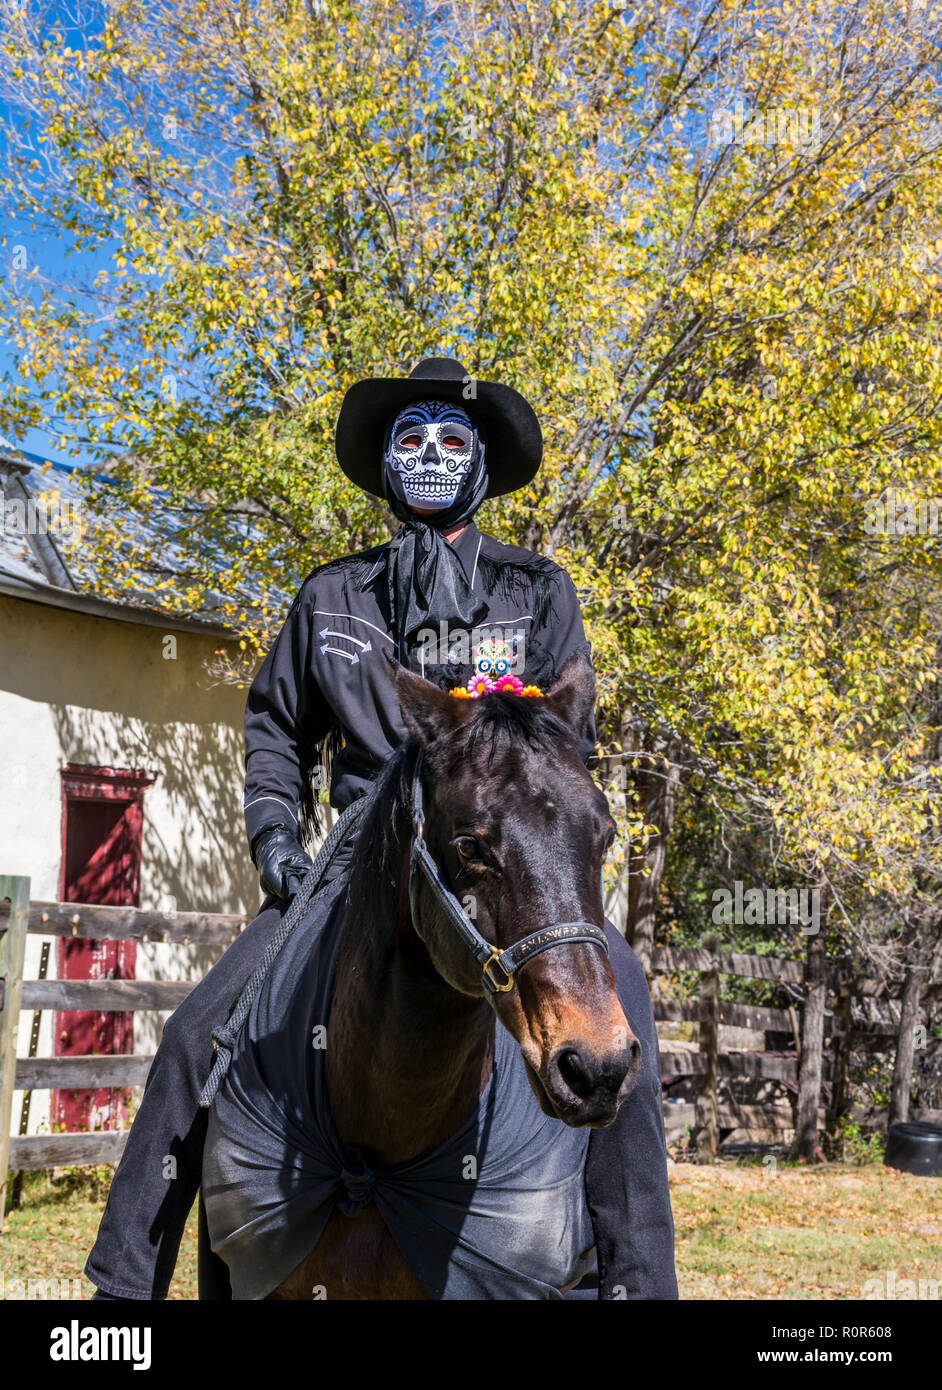 Day of the Dead, Dia de los Muertos, ghost rider, man wearing a mask and a cowboy hat riding a dark horse, Lincoln New Mexico, USA. Stock Photo